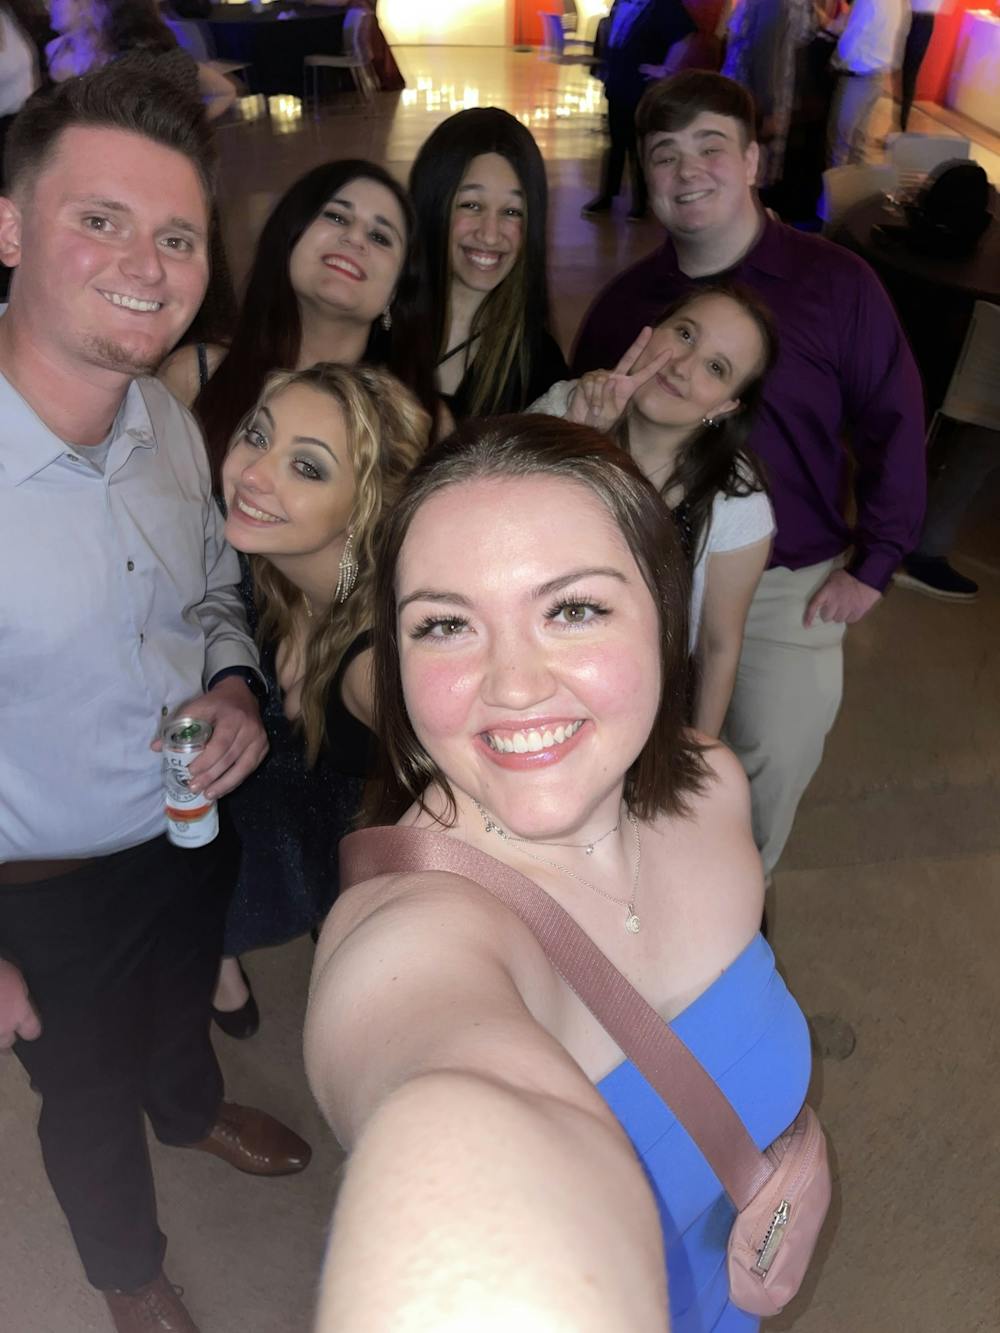 <p>Students at the Otter Ball. From left to right: Erica Bush, guest Hunter Voorhees, Ellie Newman, Jordan Hamzee, Alina Baer, Hayden Garrett, and Amy Hissrich.</p>